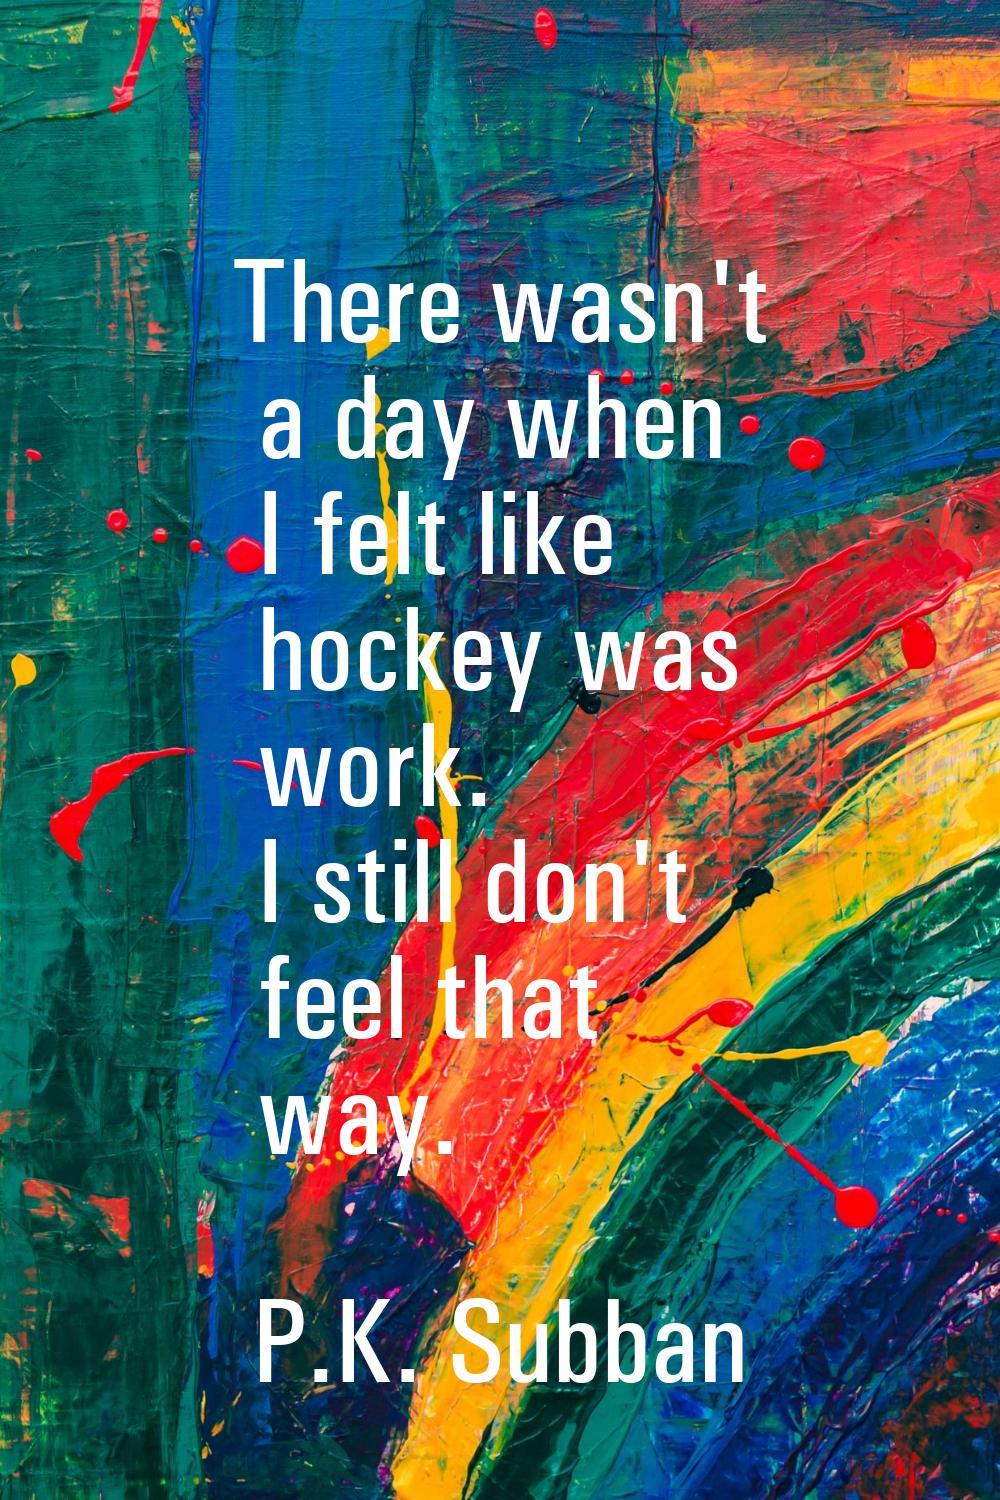 There wasn't a day when I felt like hockey was work. I still don't feel that way.